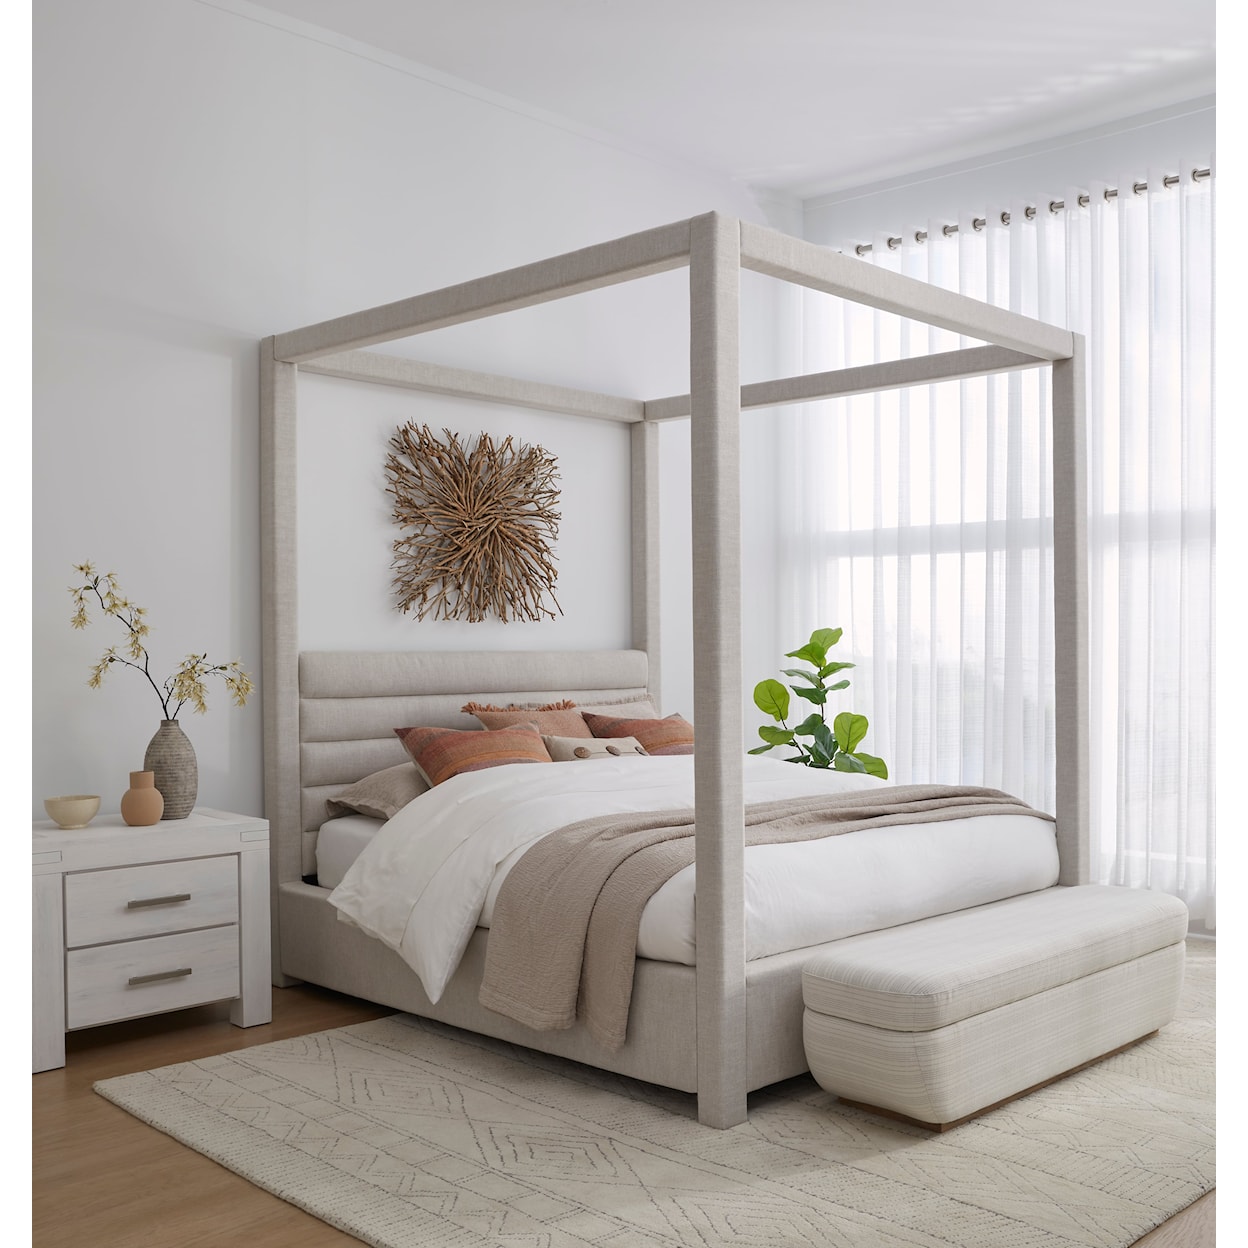 Modus International Rockford Queen Upholstered Canopy Bed